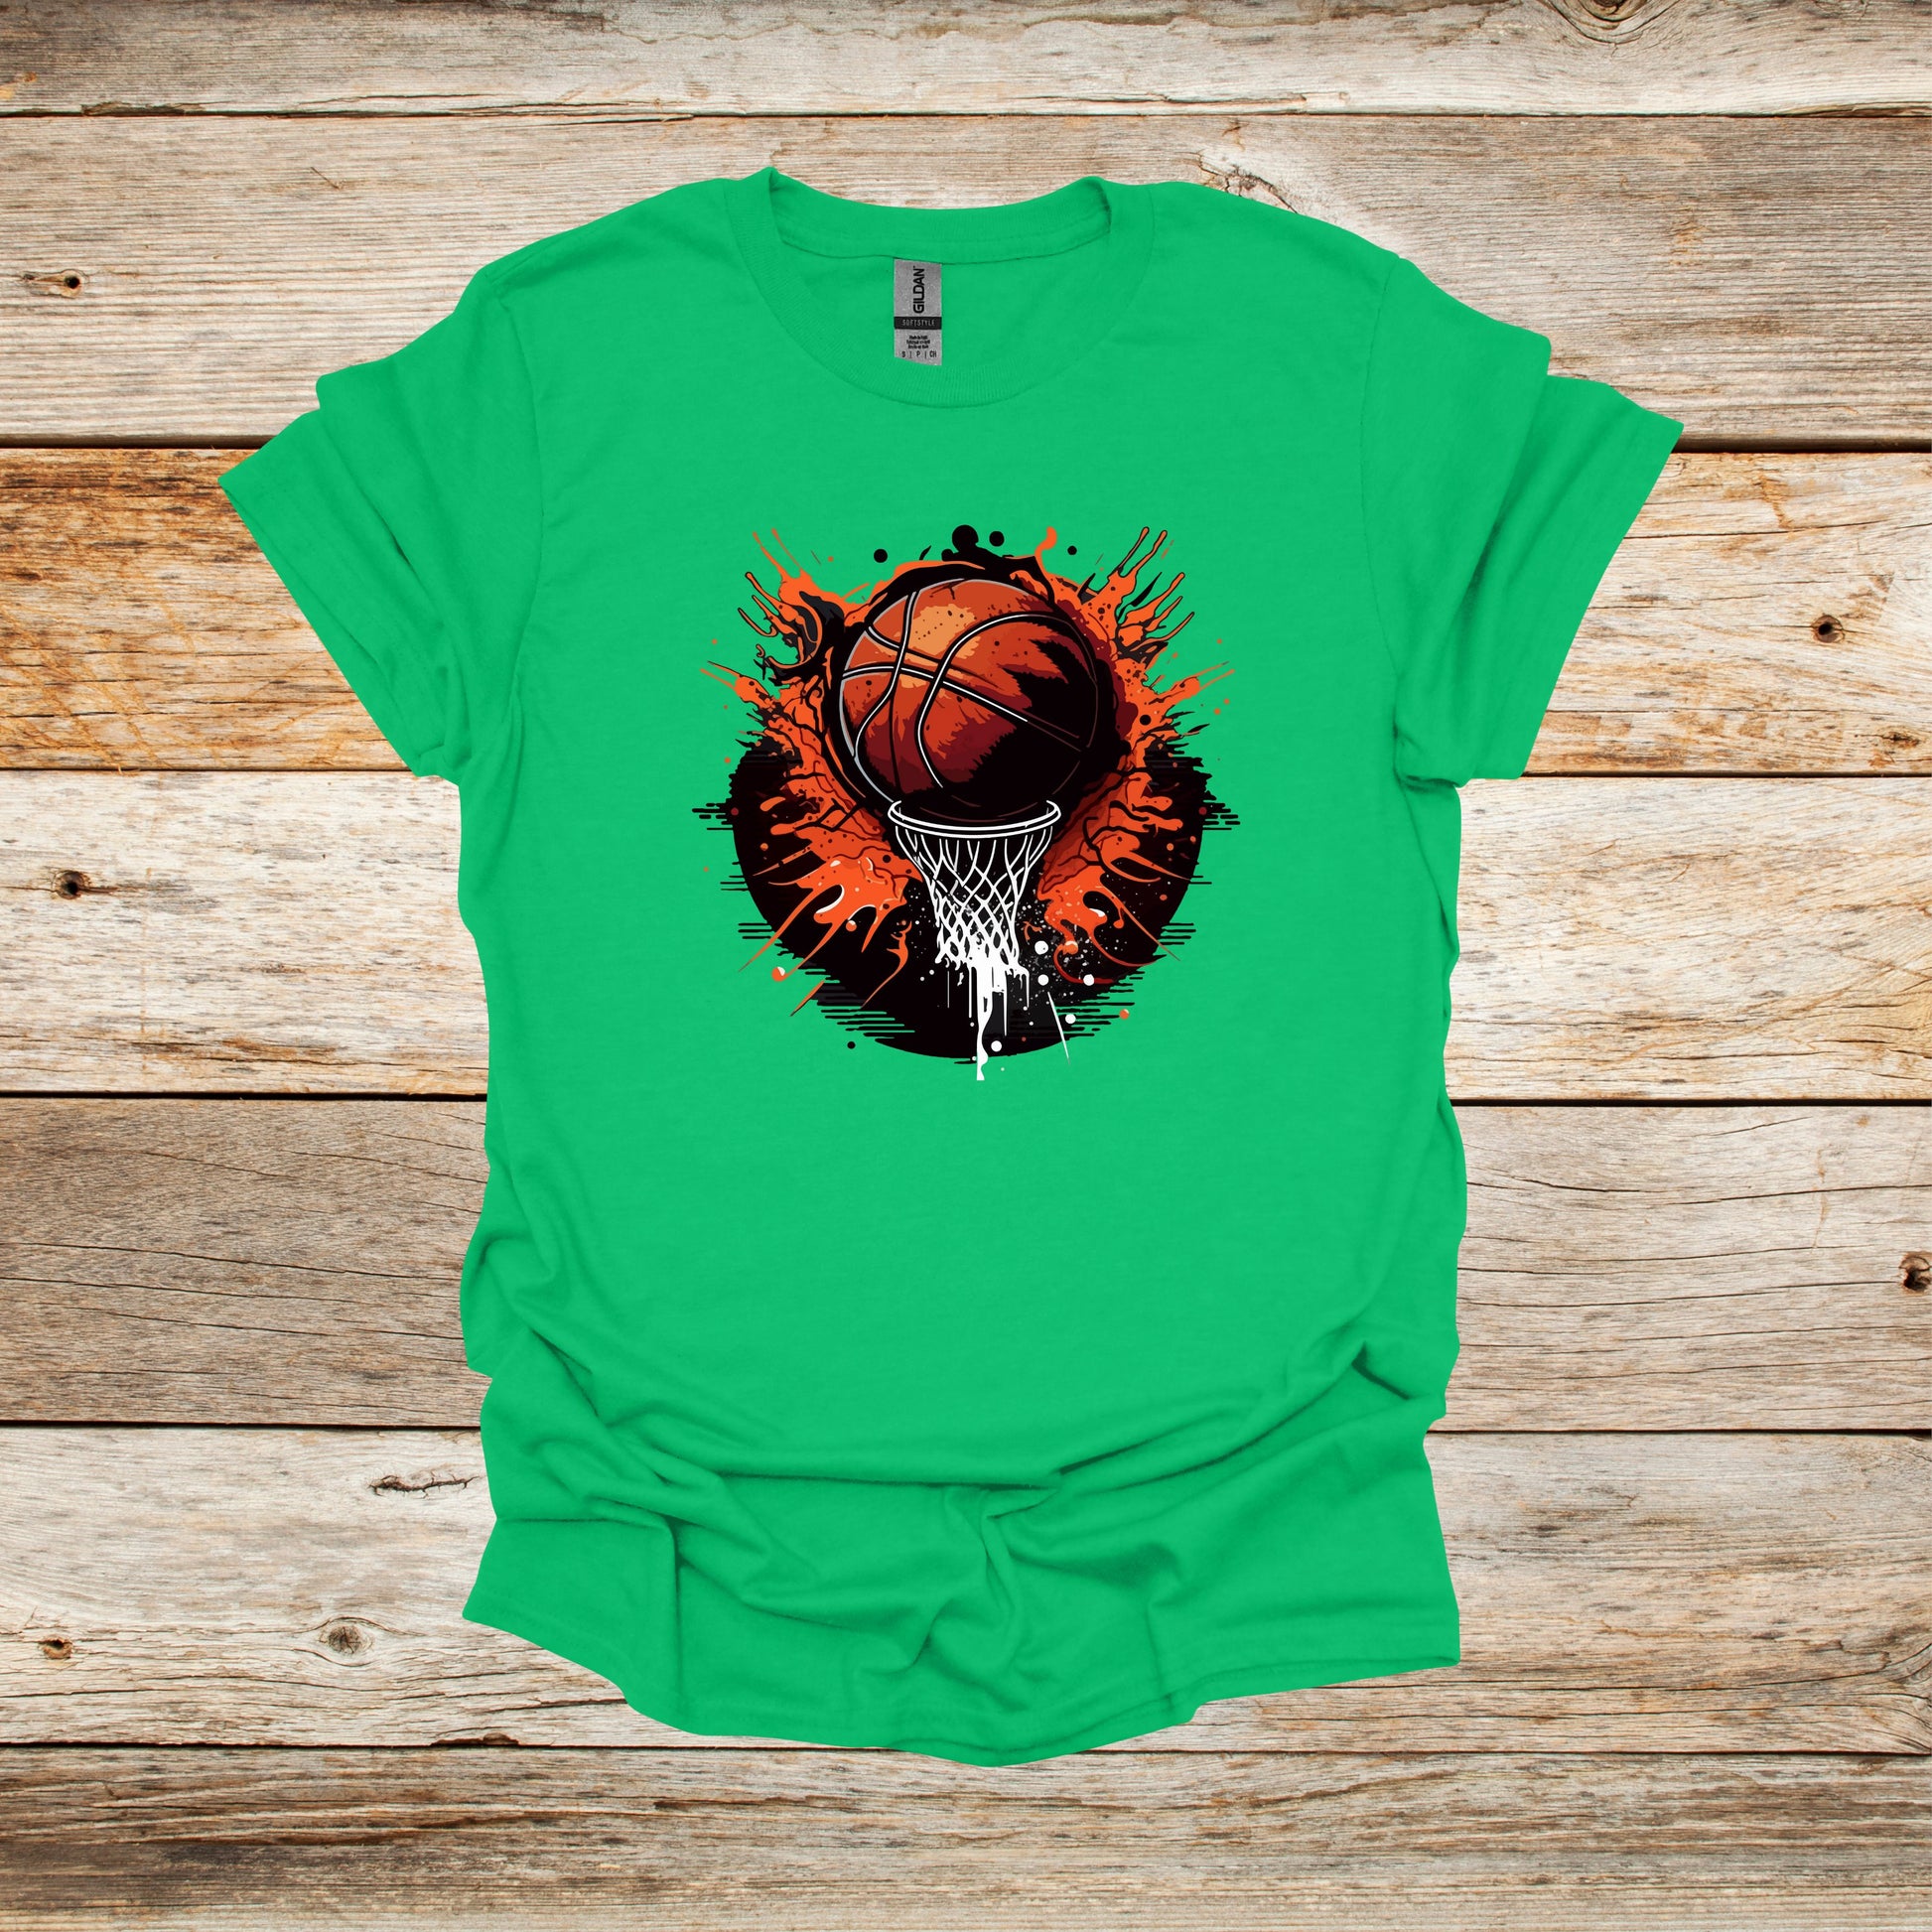 Basketball T-Shirt - Adult and Children's Tee Shirts - Sports T-Shirts Graphic Avenue Kelly Green Adult Small 